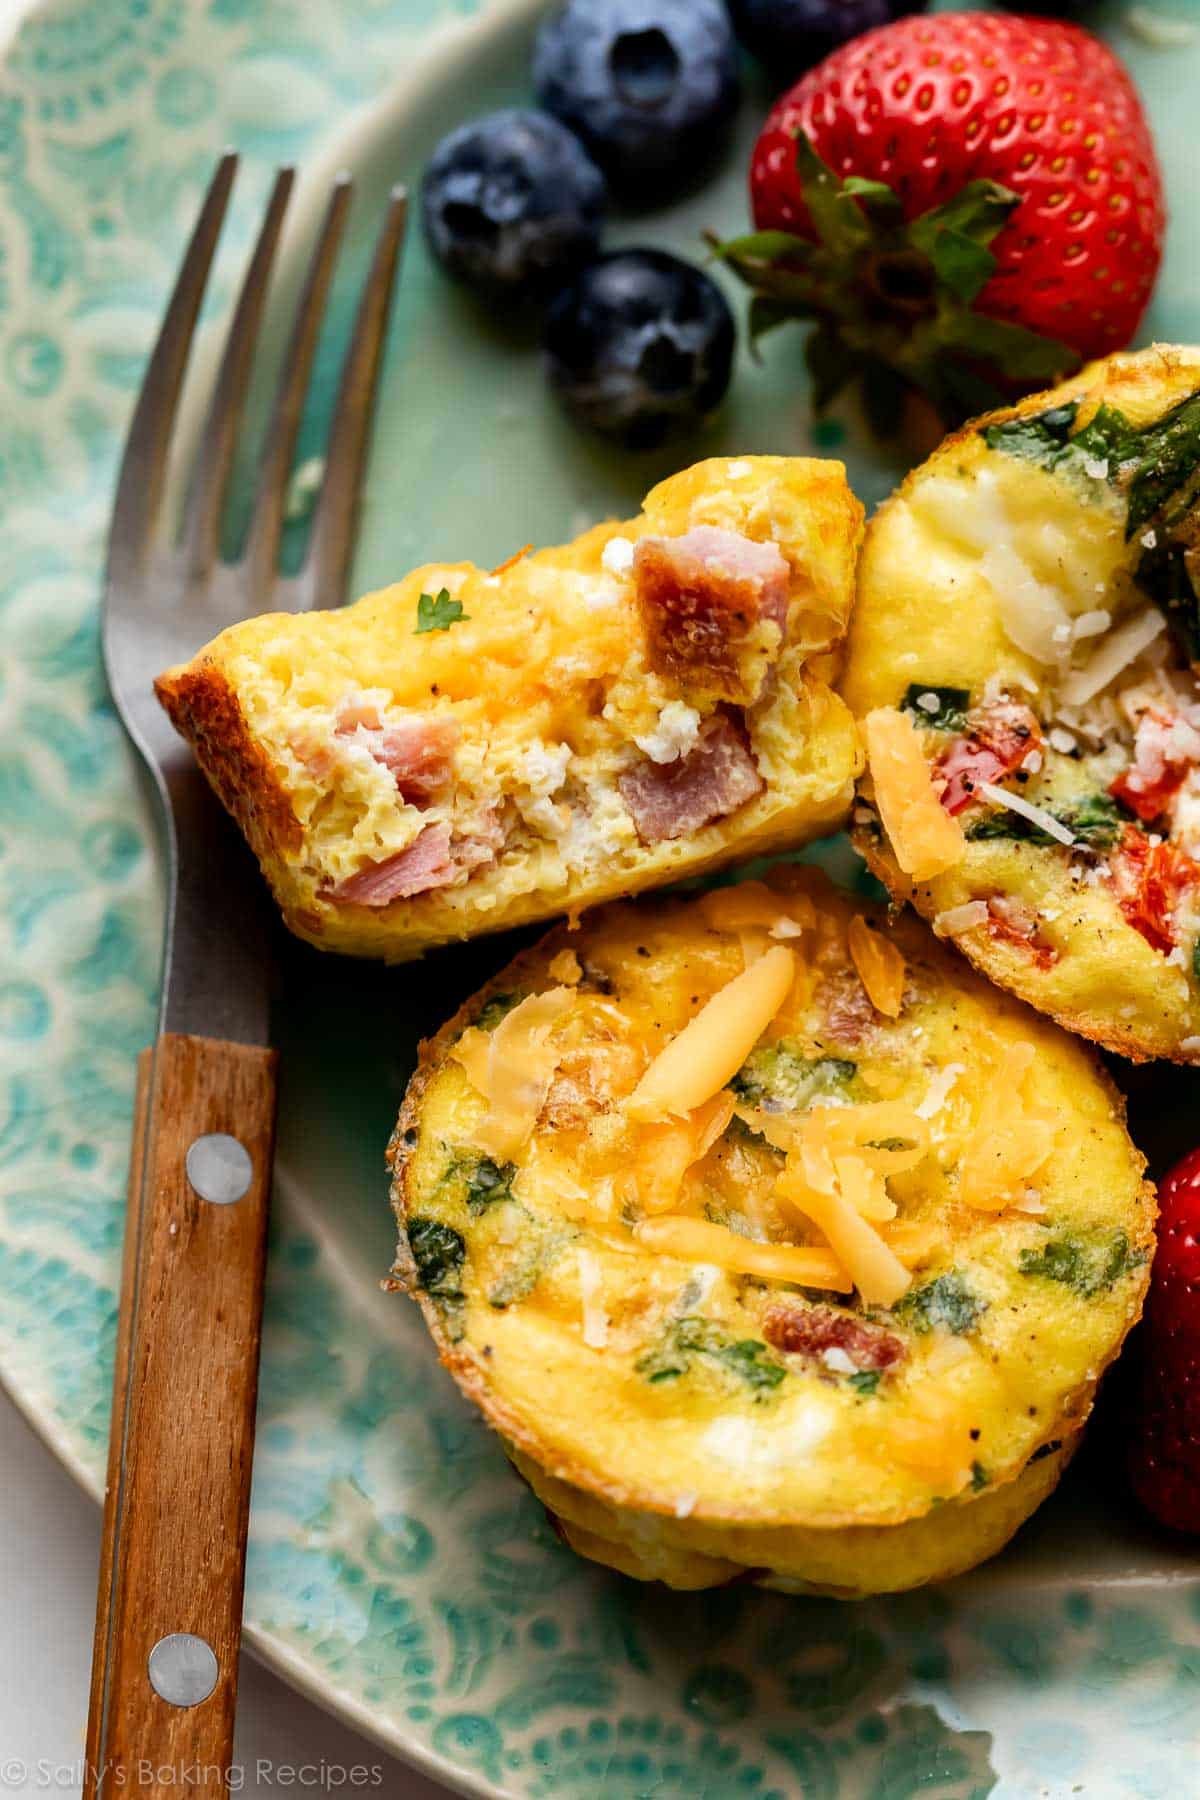 ham and cheese egg muffins on blue plate with berries in background.